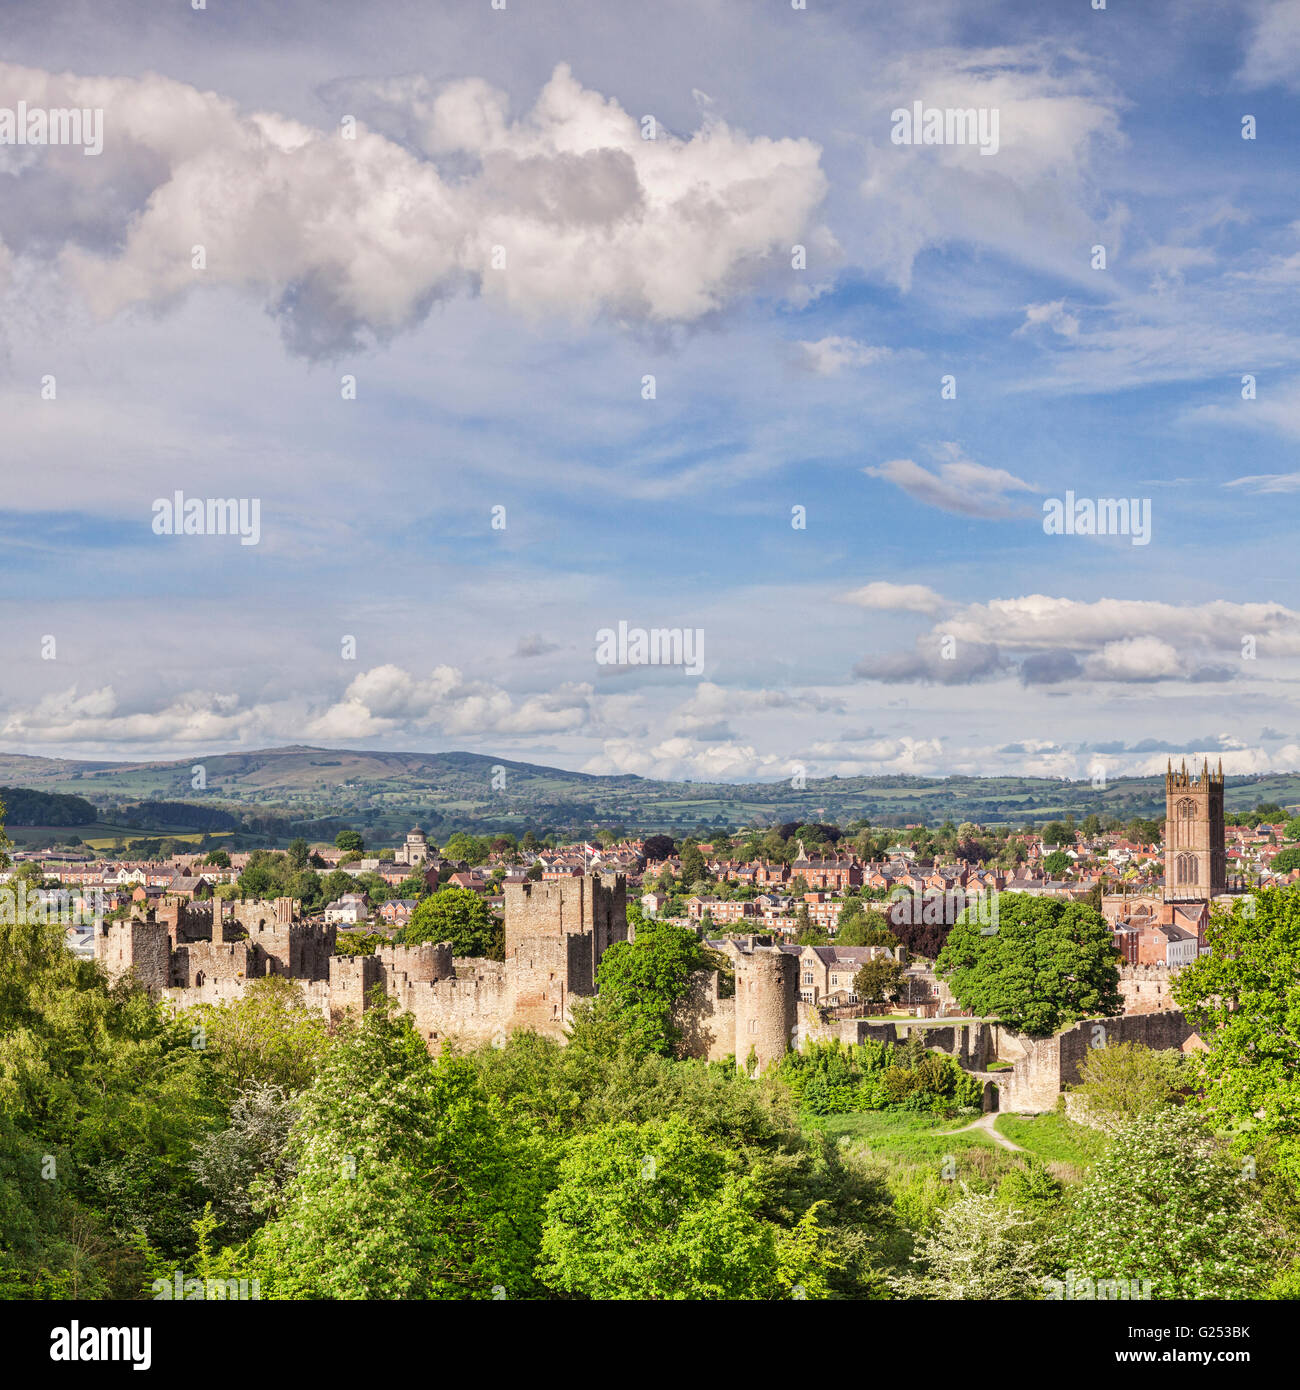 Ludlow Castle and town, Shropshire, England, UK Stock Photo